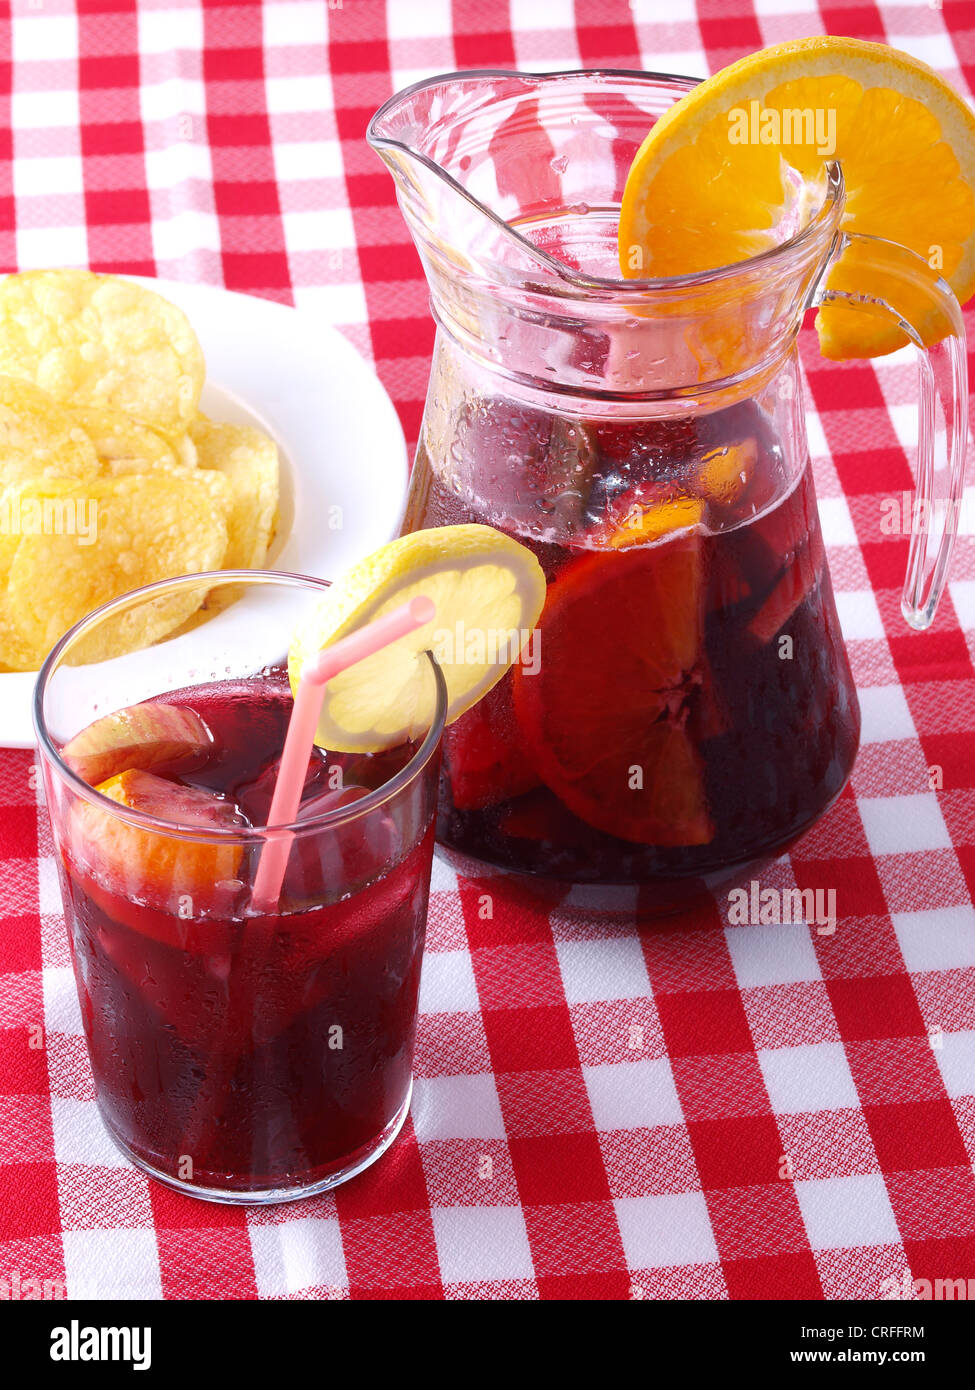 https://c8.alamy.com/comp/CRFFRM/sangria-pitcher-and-a-glass-served-with-chips-CRFFRM.jpg